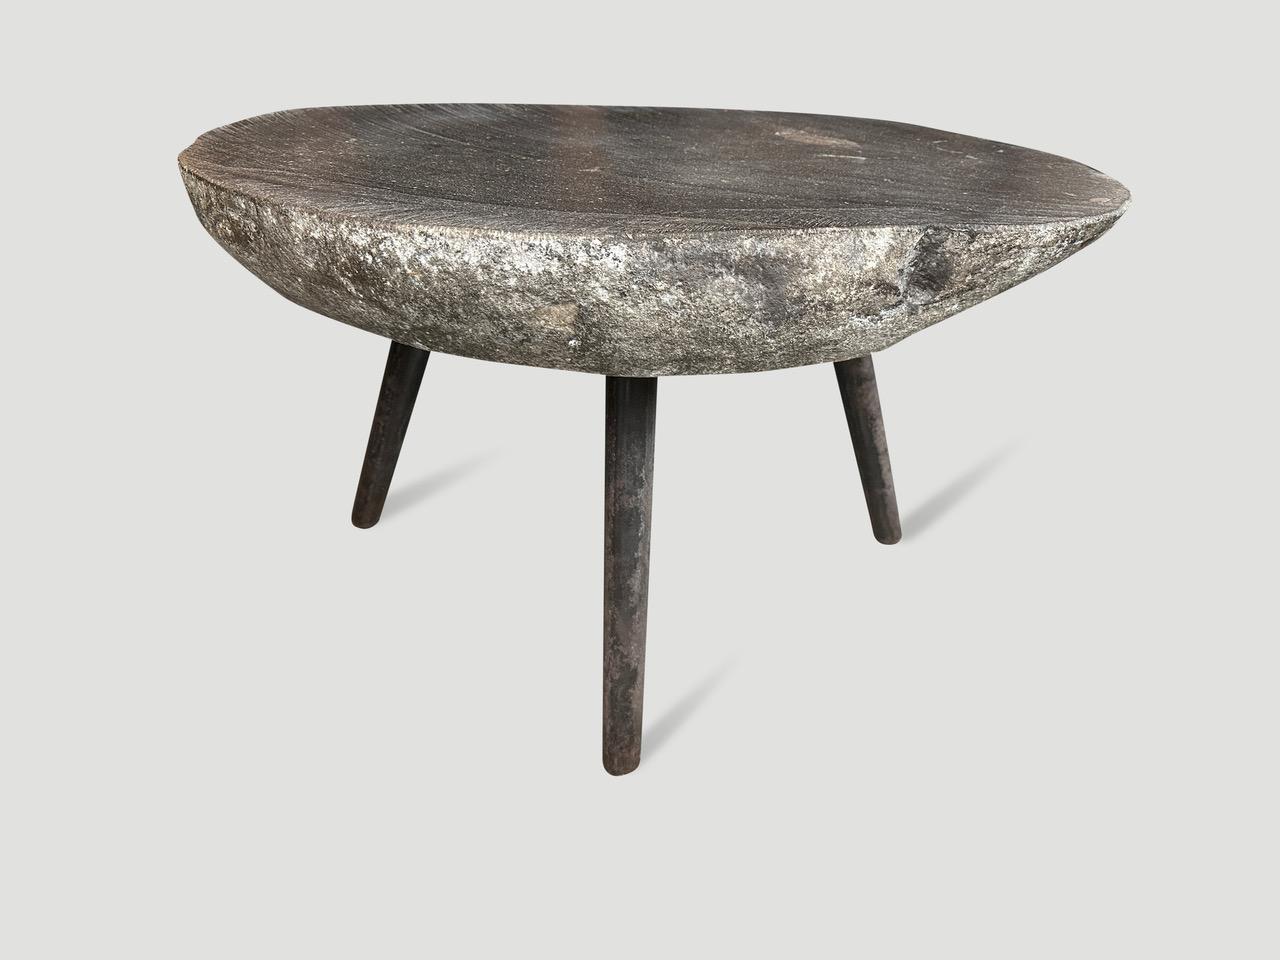 River stone side table from the Ayung River on the island of Bali. We added charred metal legs and polished the top. The sides are left unpolished in contrast. Perfect for poolside. Collection available. All one of a kind. Please inquire. The images